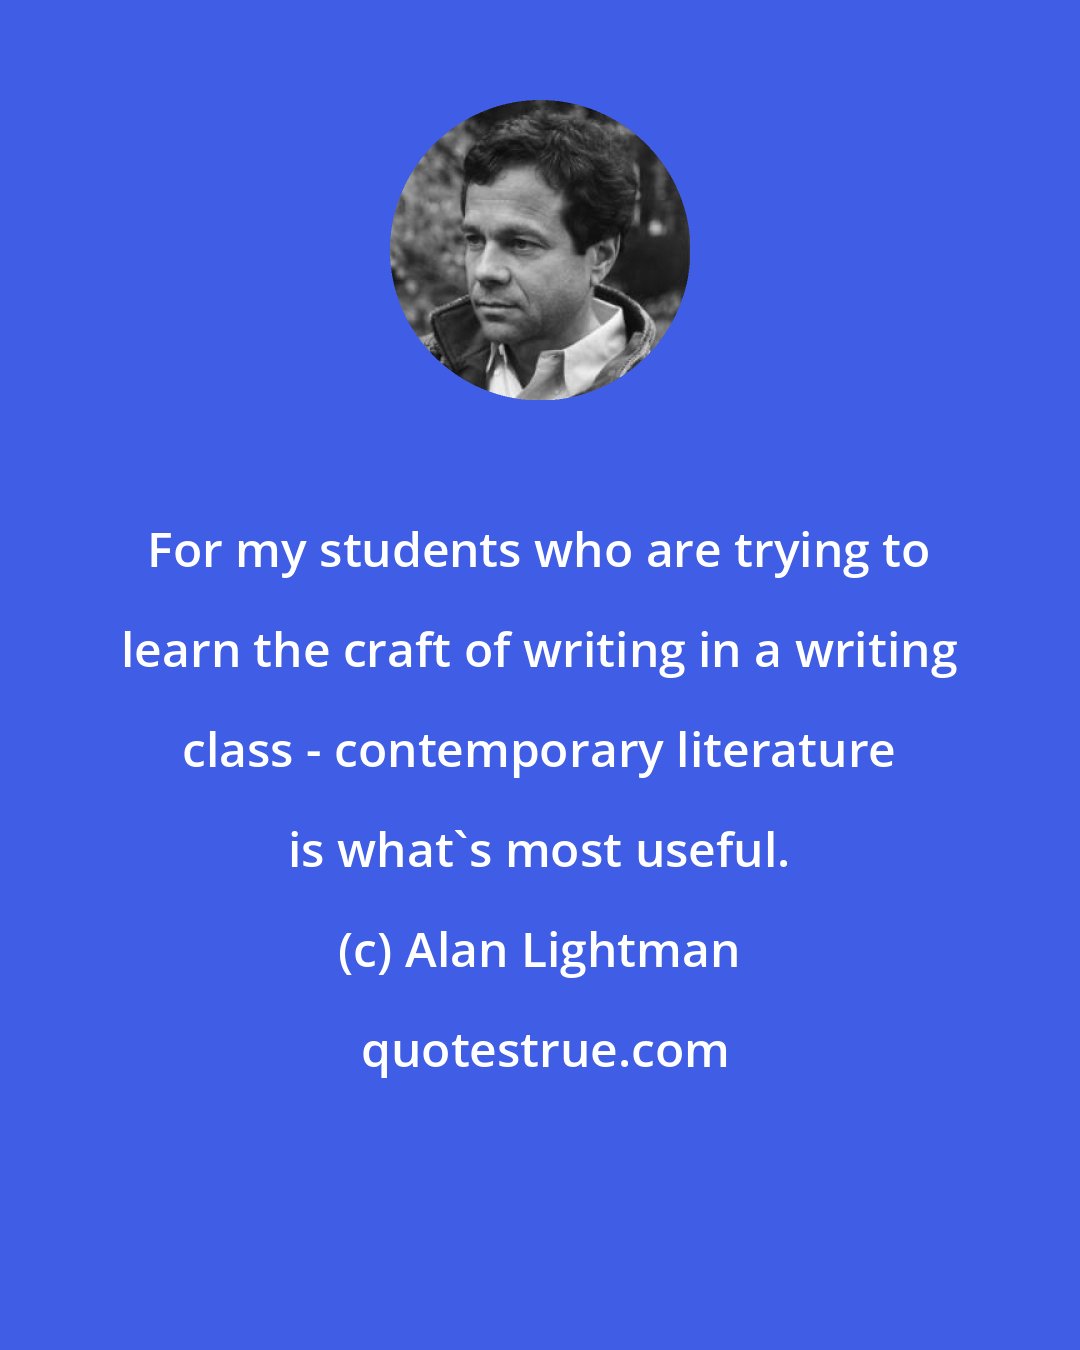 Alan Lightman: For my students who are trying to learn the craft of writing in a writing class - contemporary literature is what's most useful.